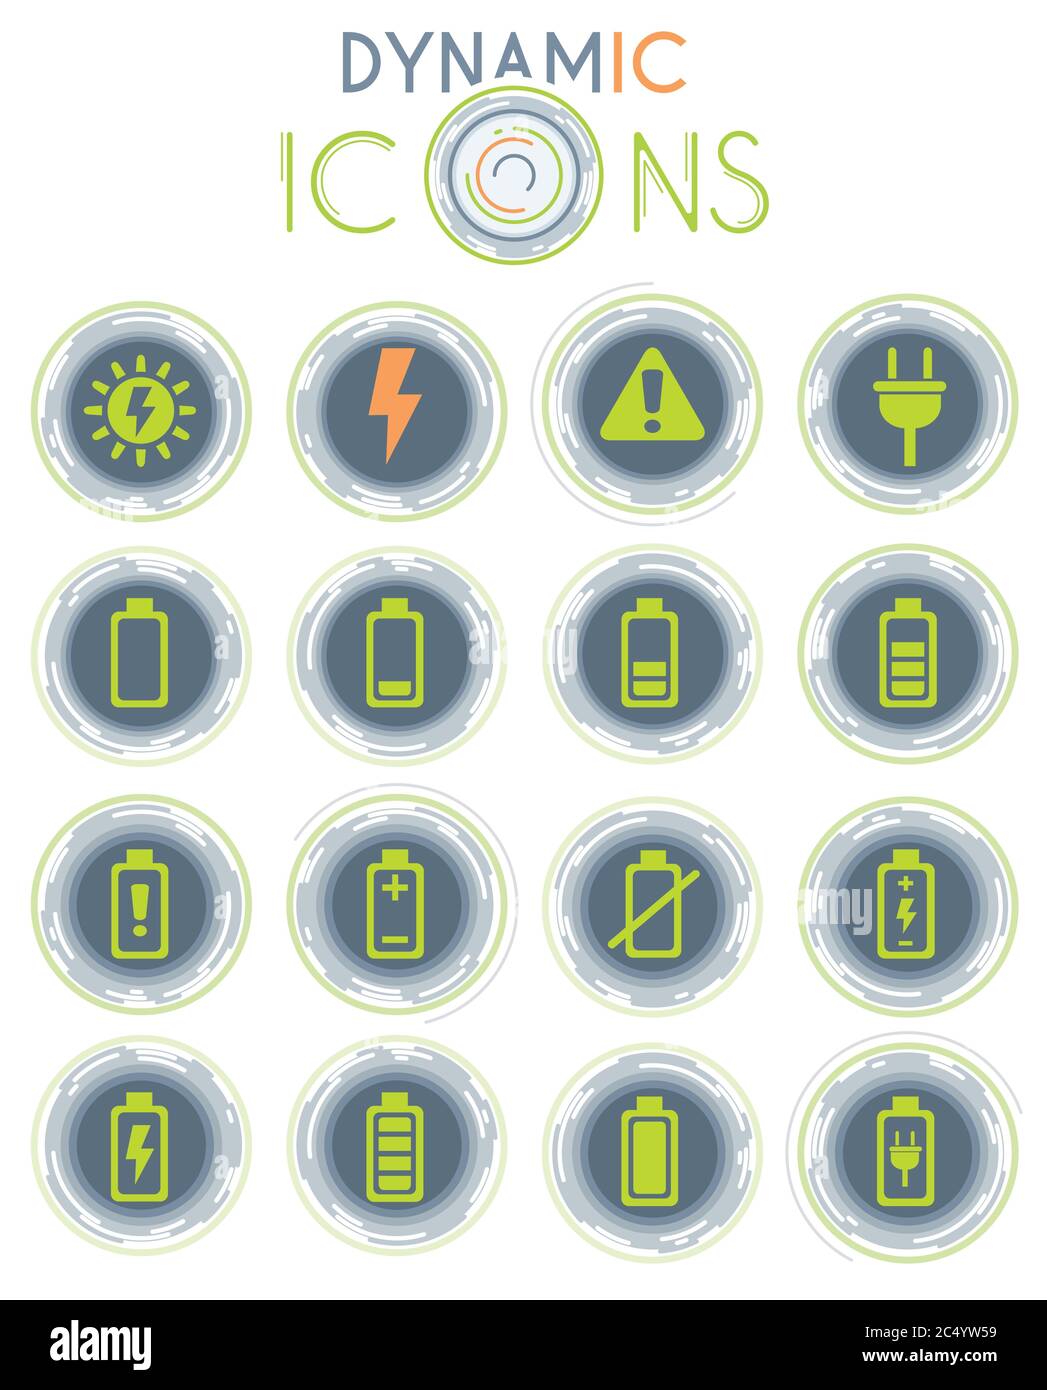 battery dynamic icons Stock Vector